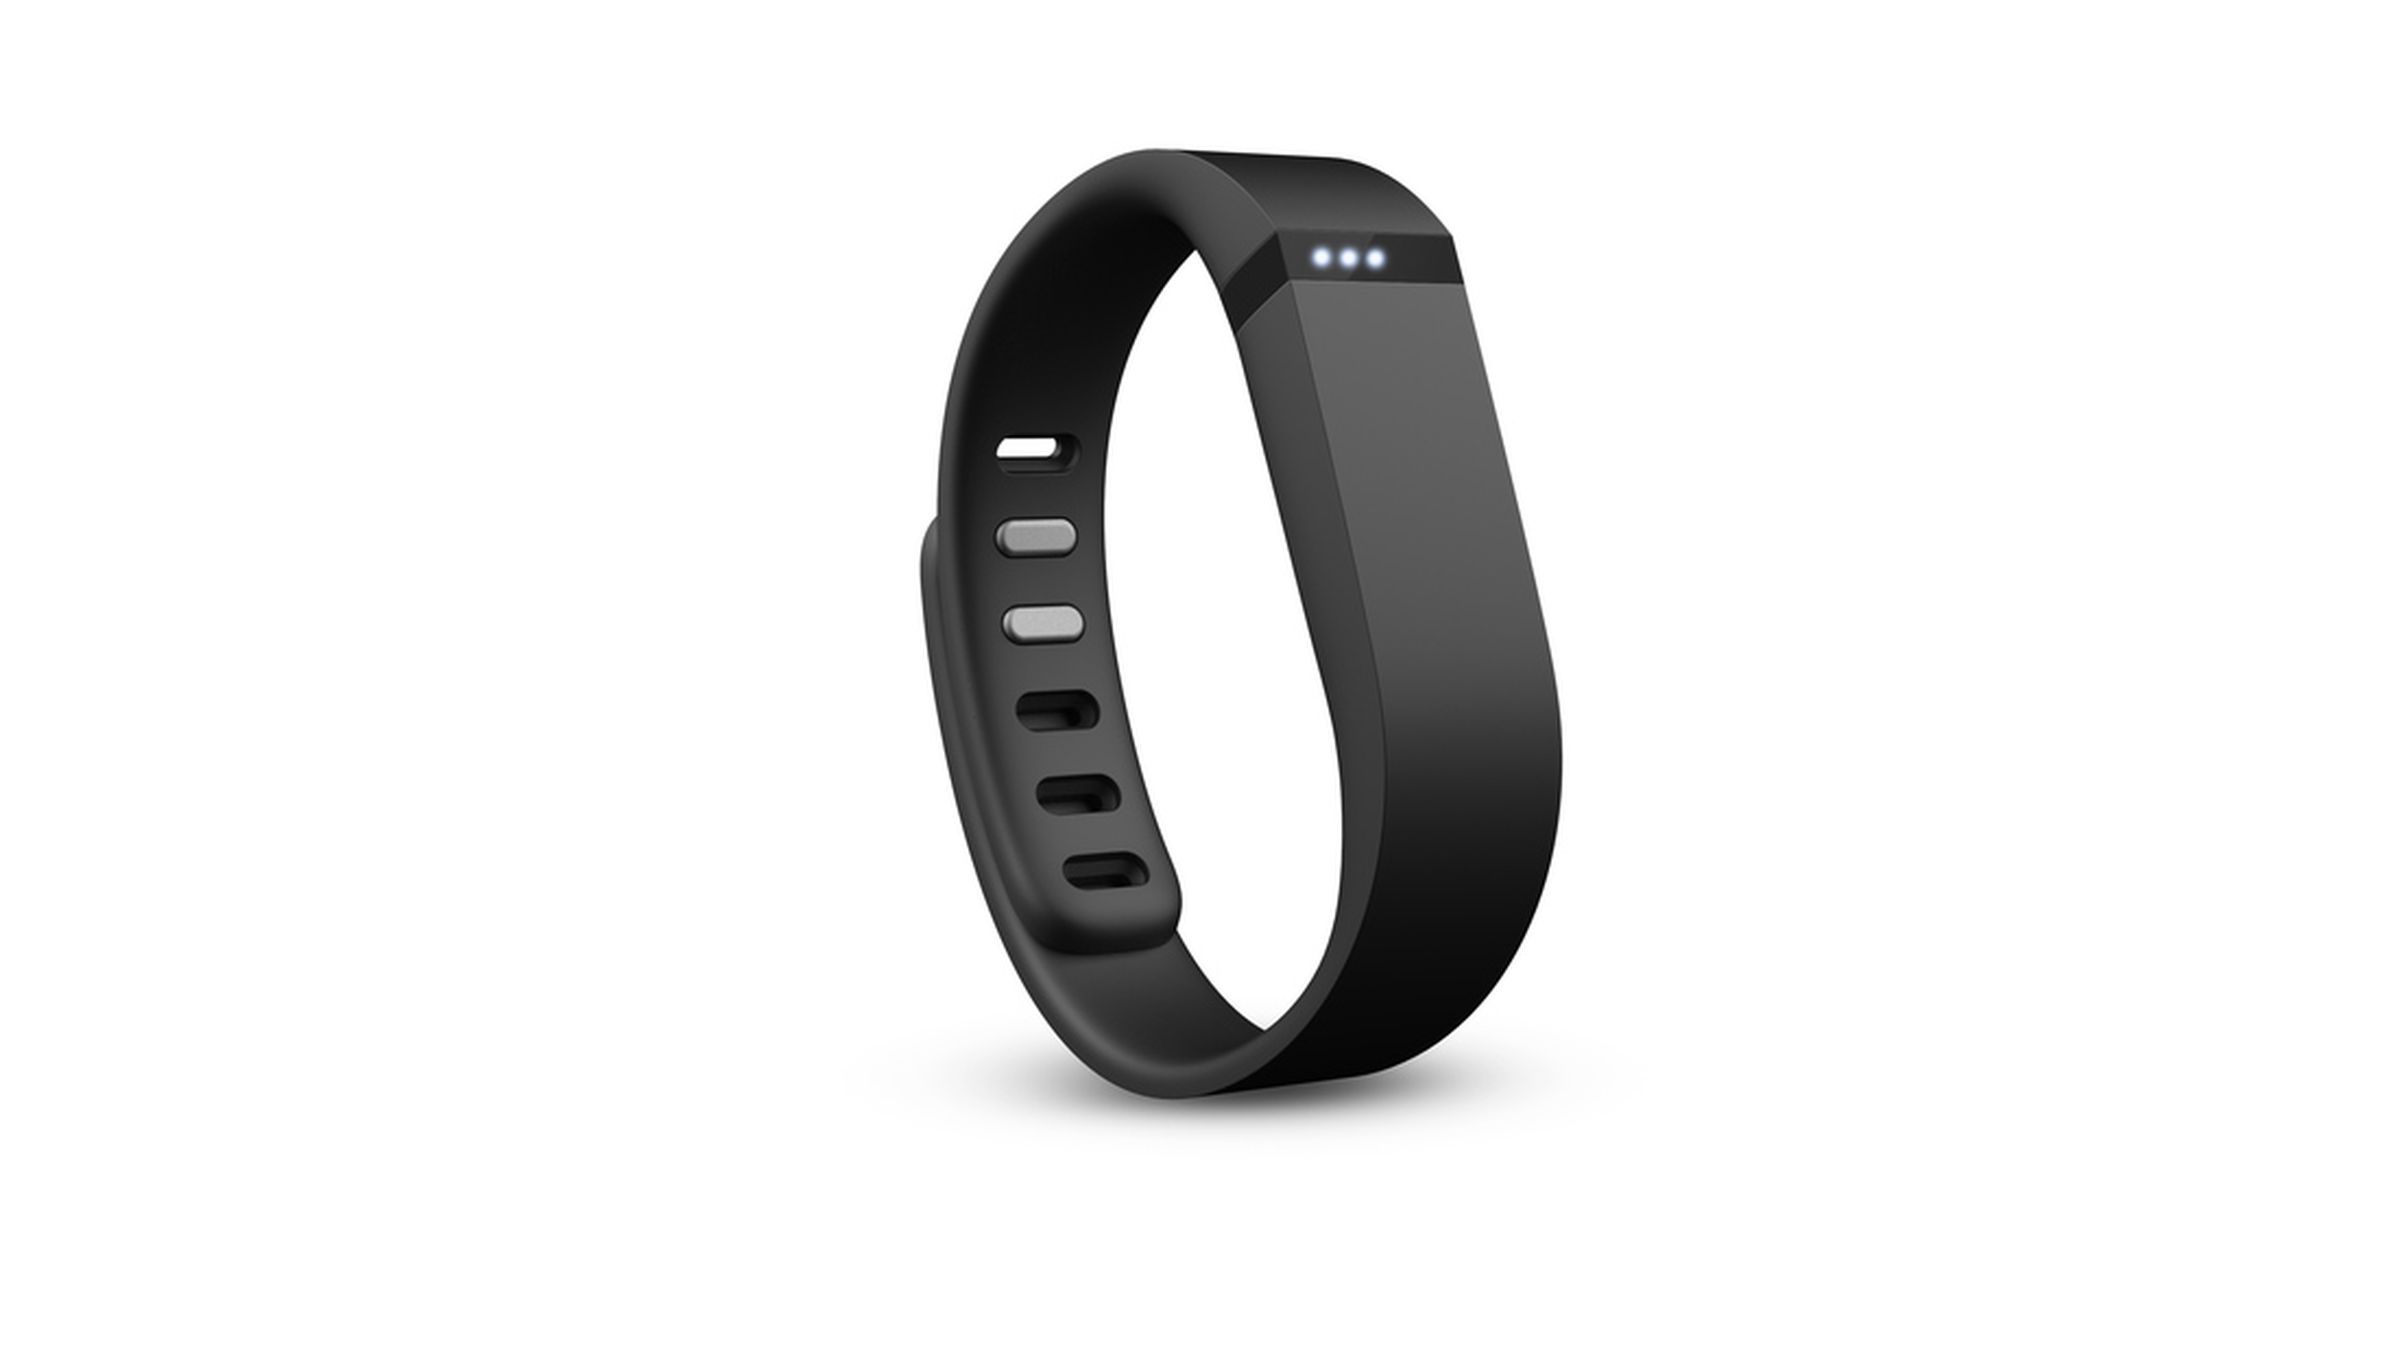 Gallery of Fitbit Flex images